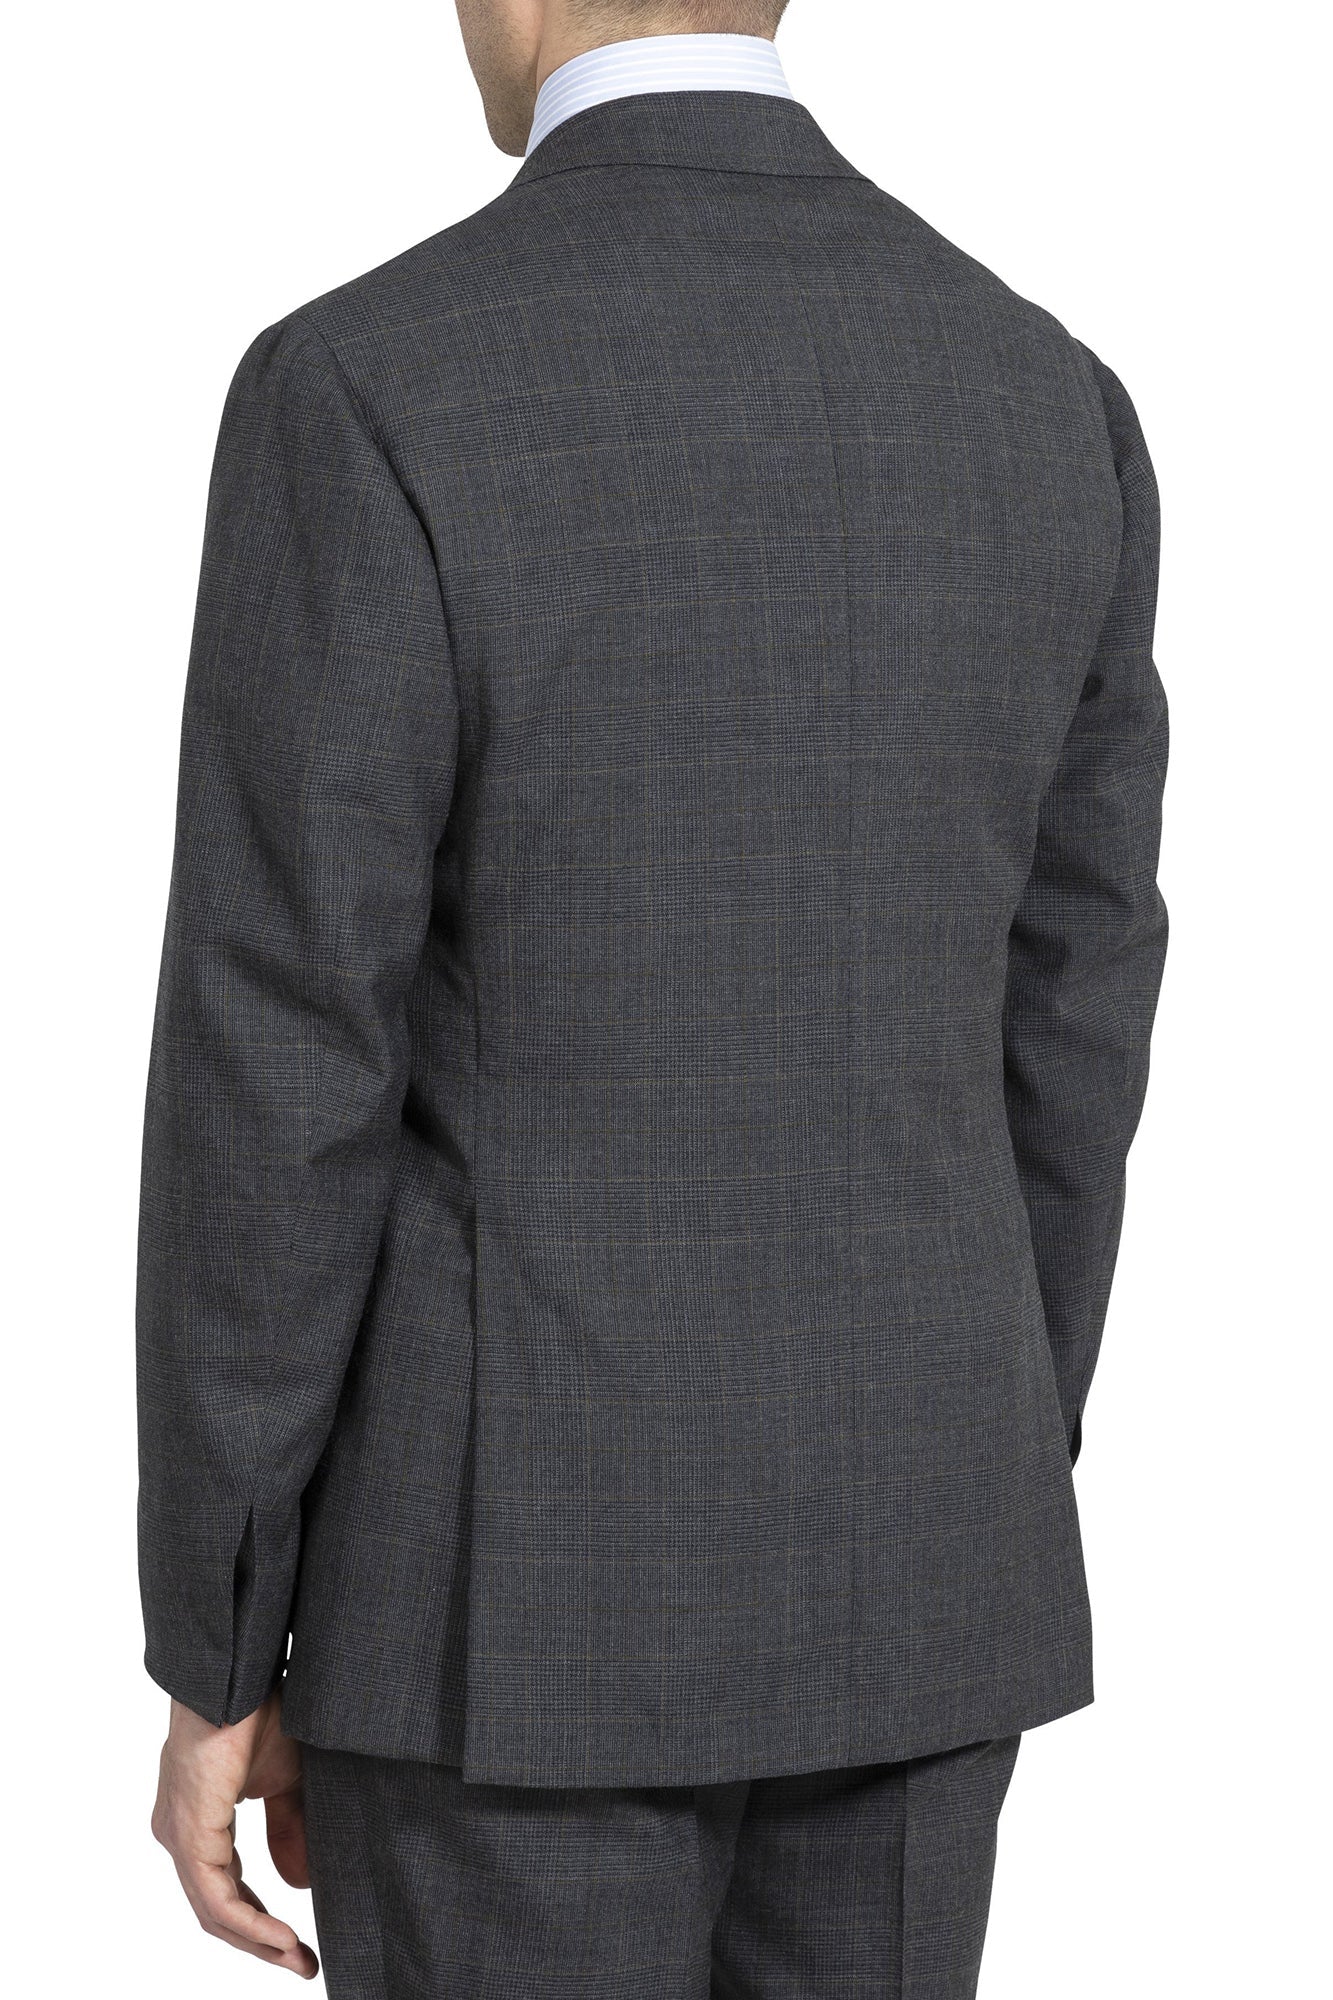 The Armoury by Ring Jacket Model 3A Charcoal/Olive Wool Glen Plaid Suit